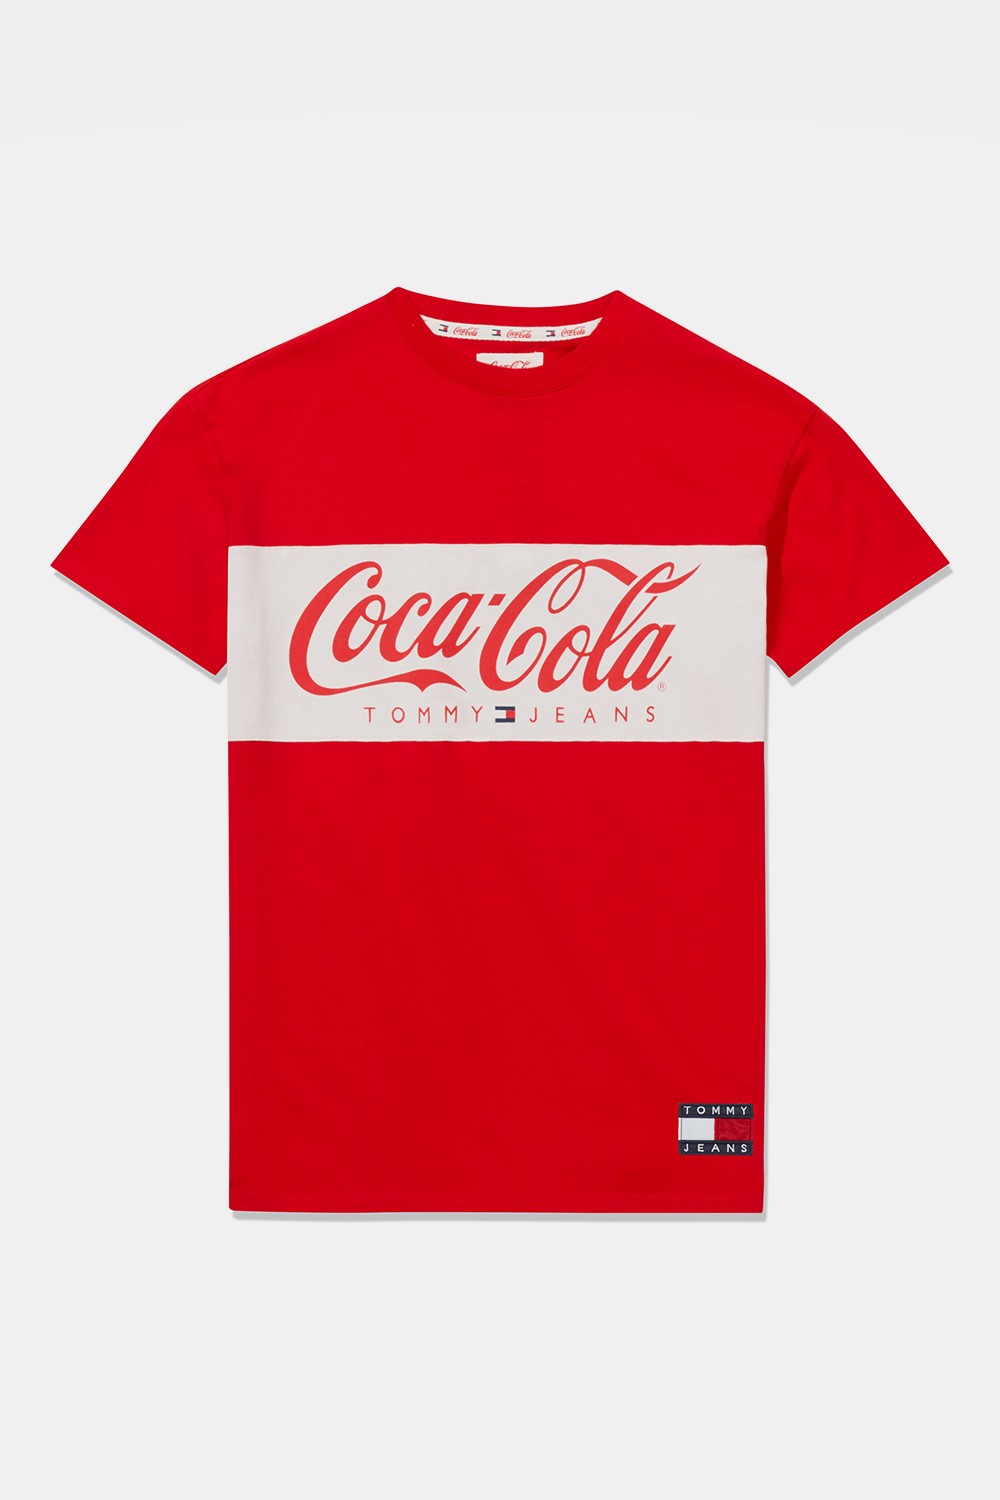 tommy-jeans-coca-cola-ss19-capsule-collection-17.jpg